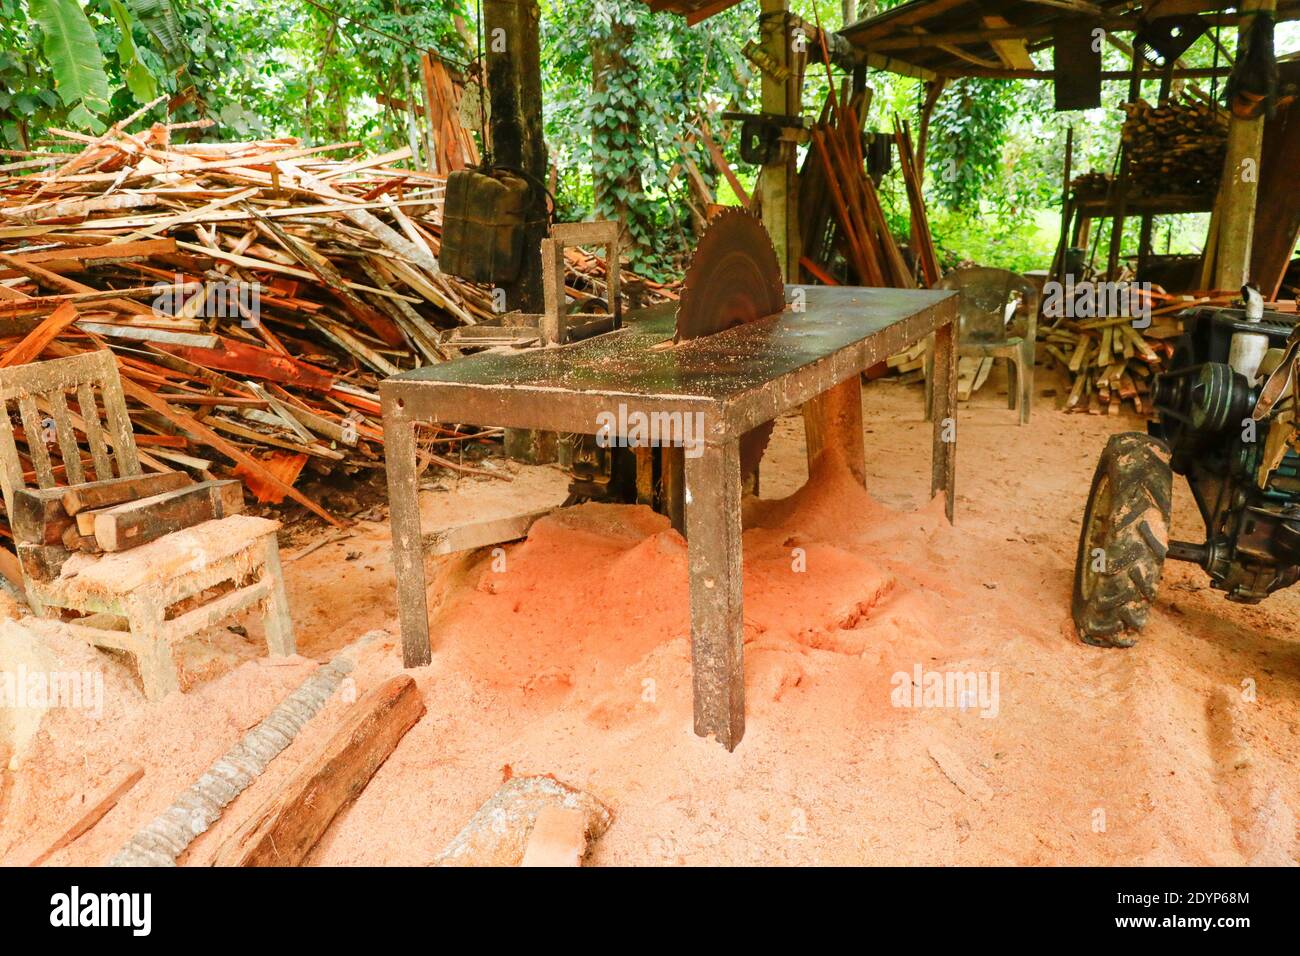 Local Old Saw Mill Work Bench With saw Blade - Sri Lanka Stock Photo